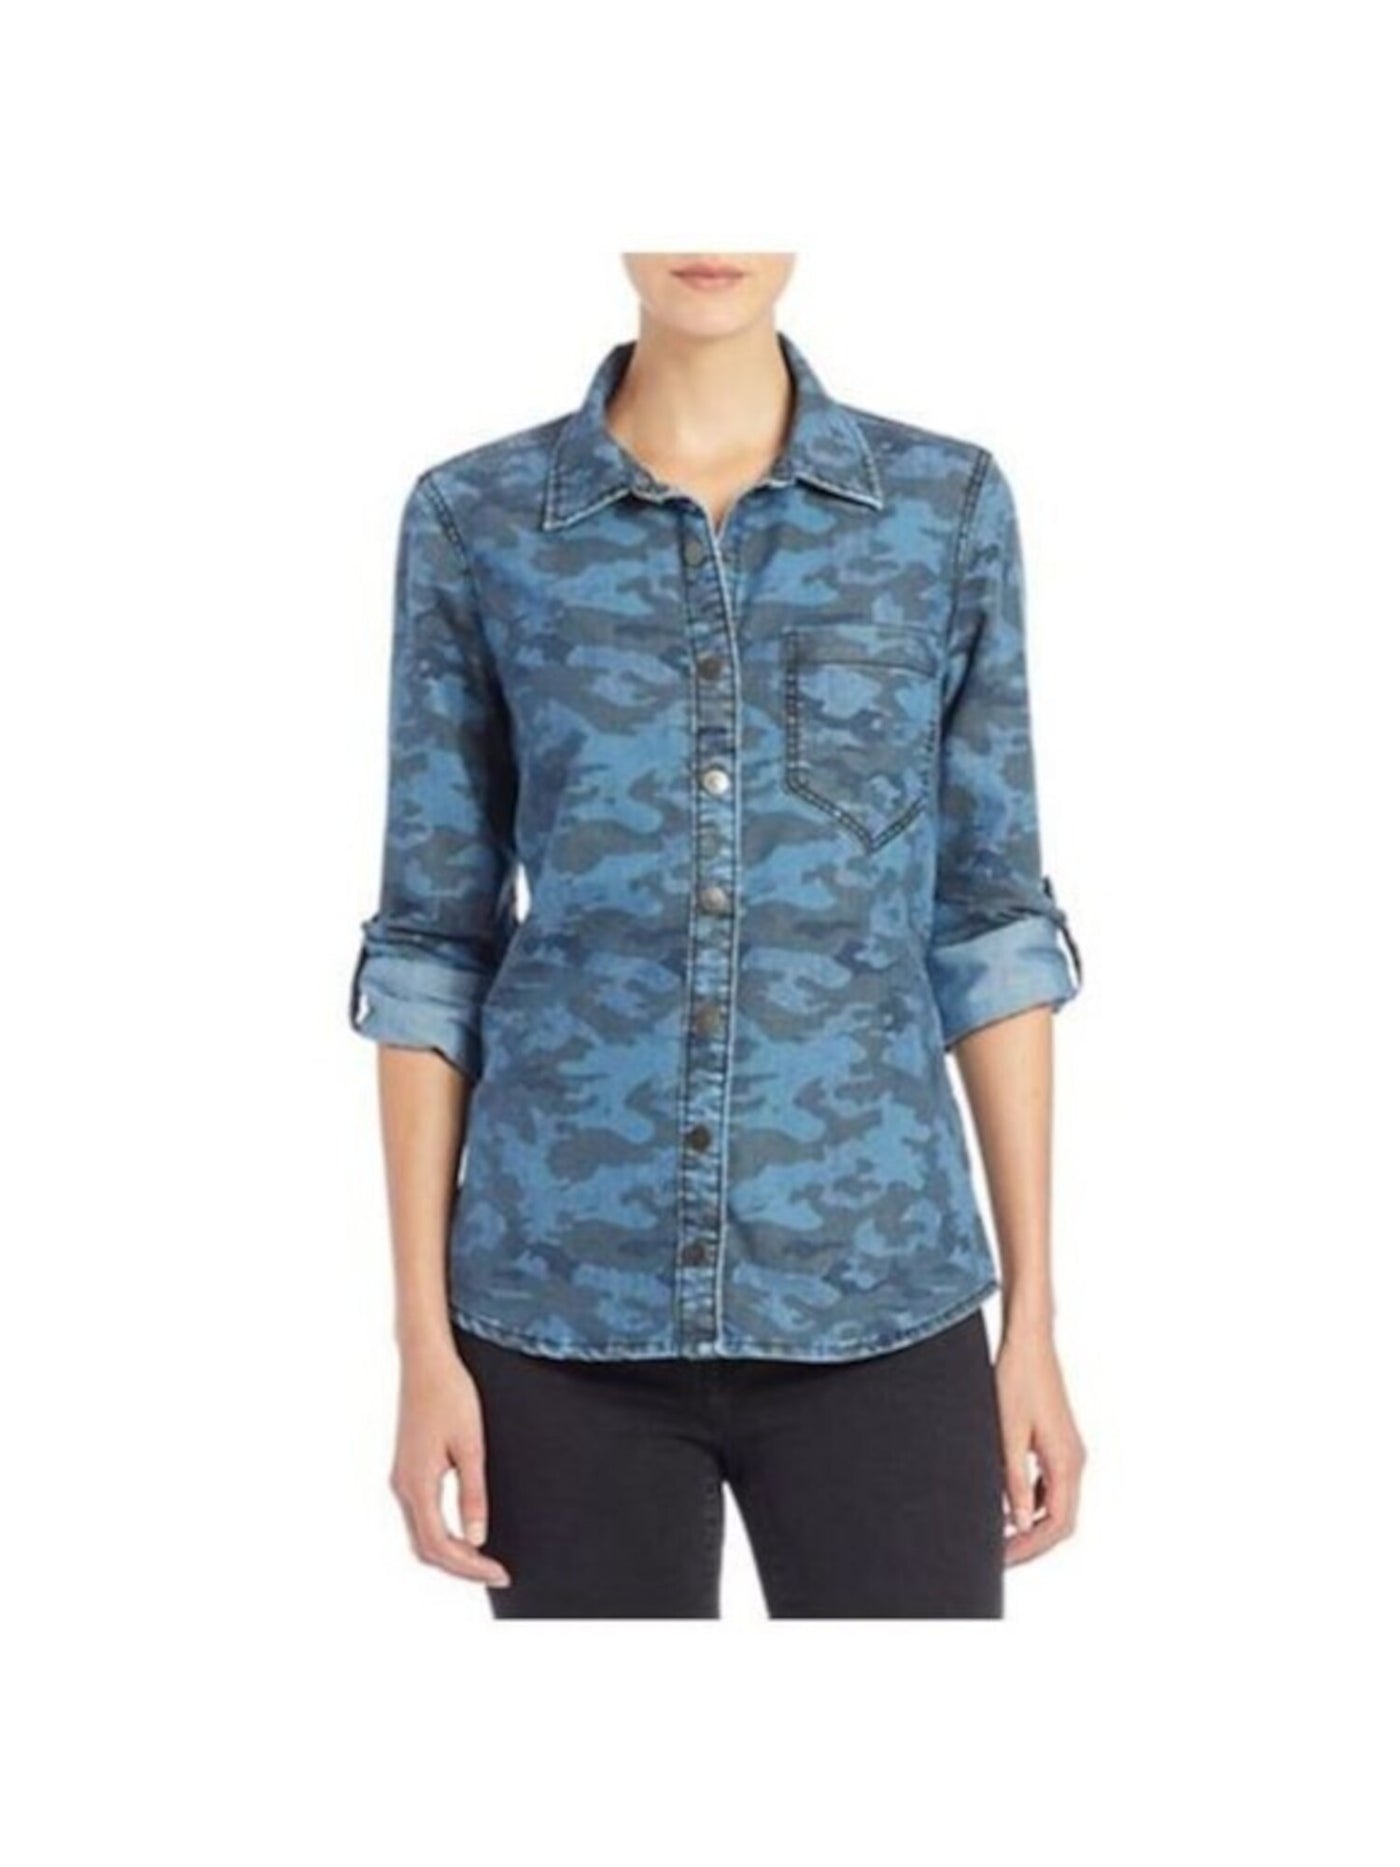 BLANK NYC Womens Blue Denim Pocketed Snap Closure Camouflage Roll-tab Sleeve Collared Button Up Top S